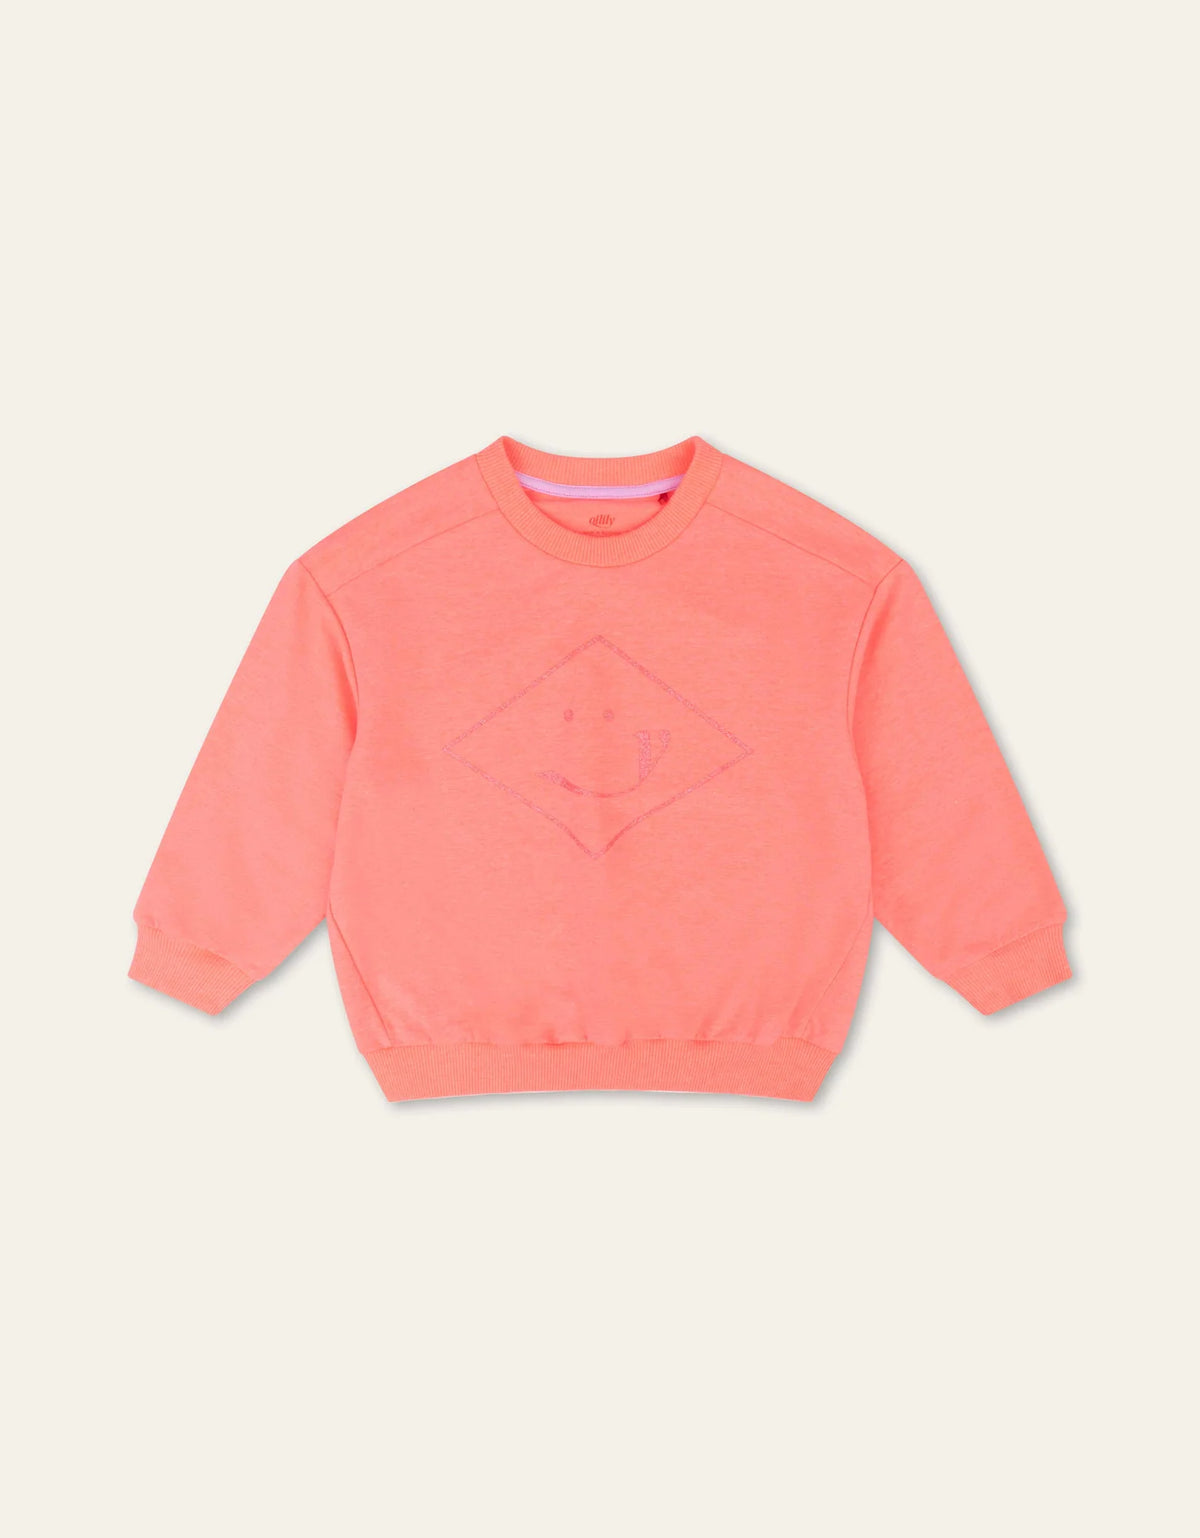 Hooray sweater pink Oilily smiley logo, Oilily